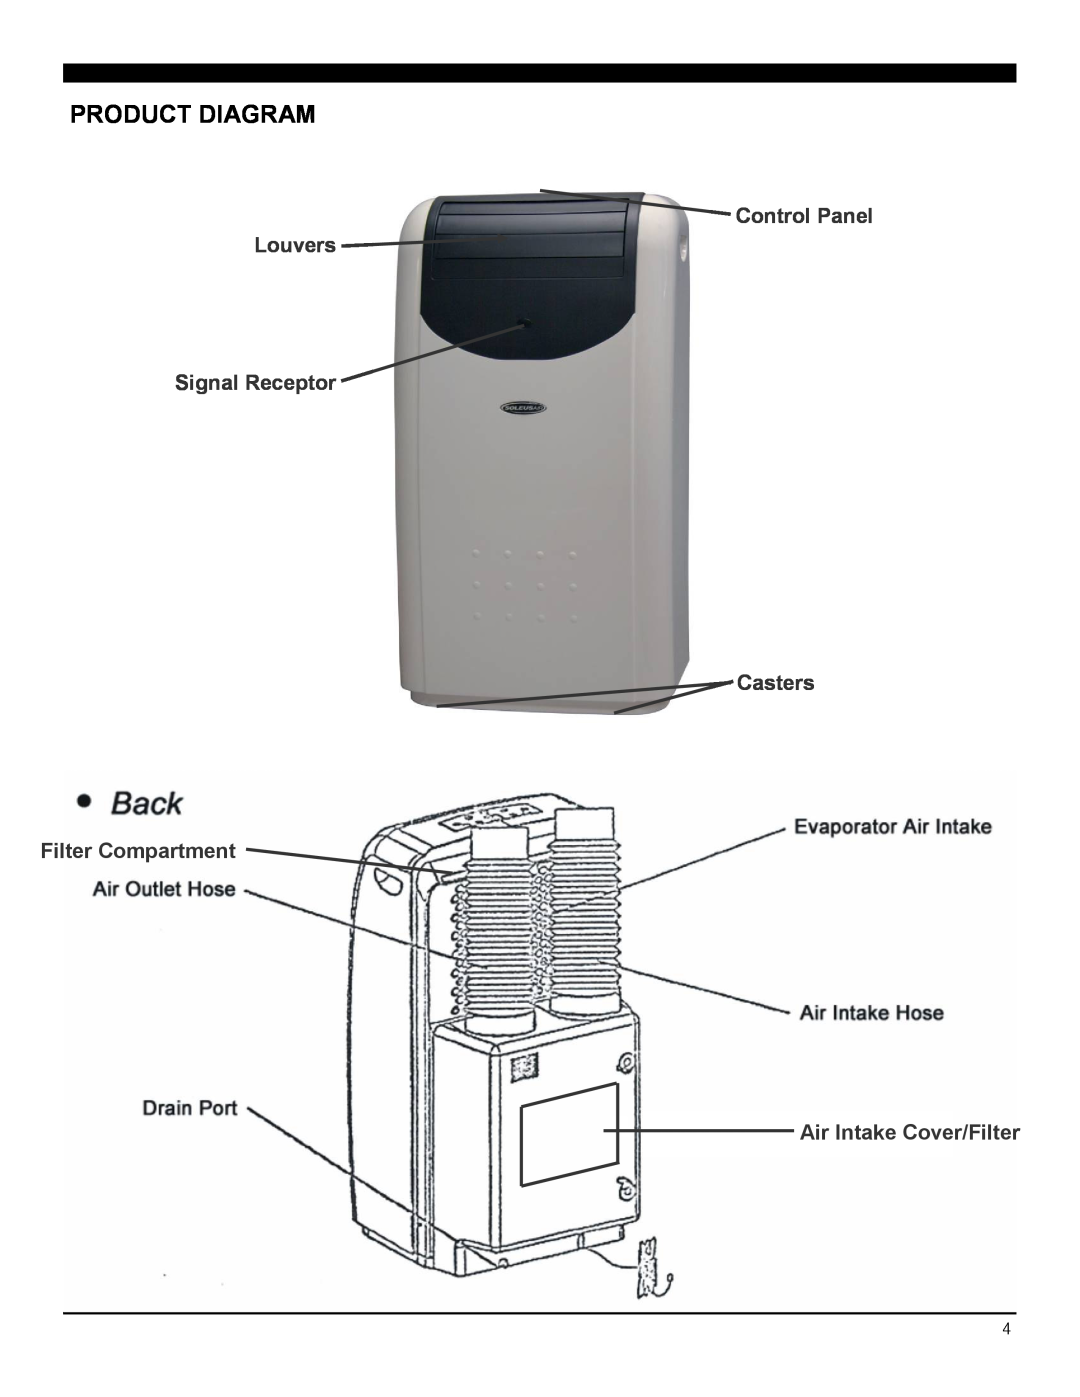 Soleus Air LX-140BL operating instructions Product Diagram, Control Panel Louvers Signal Receptor Casters 